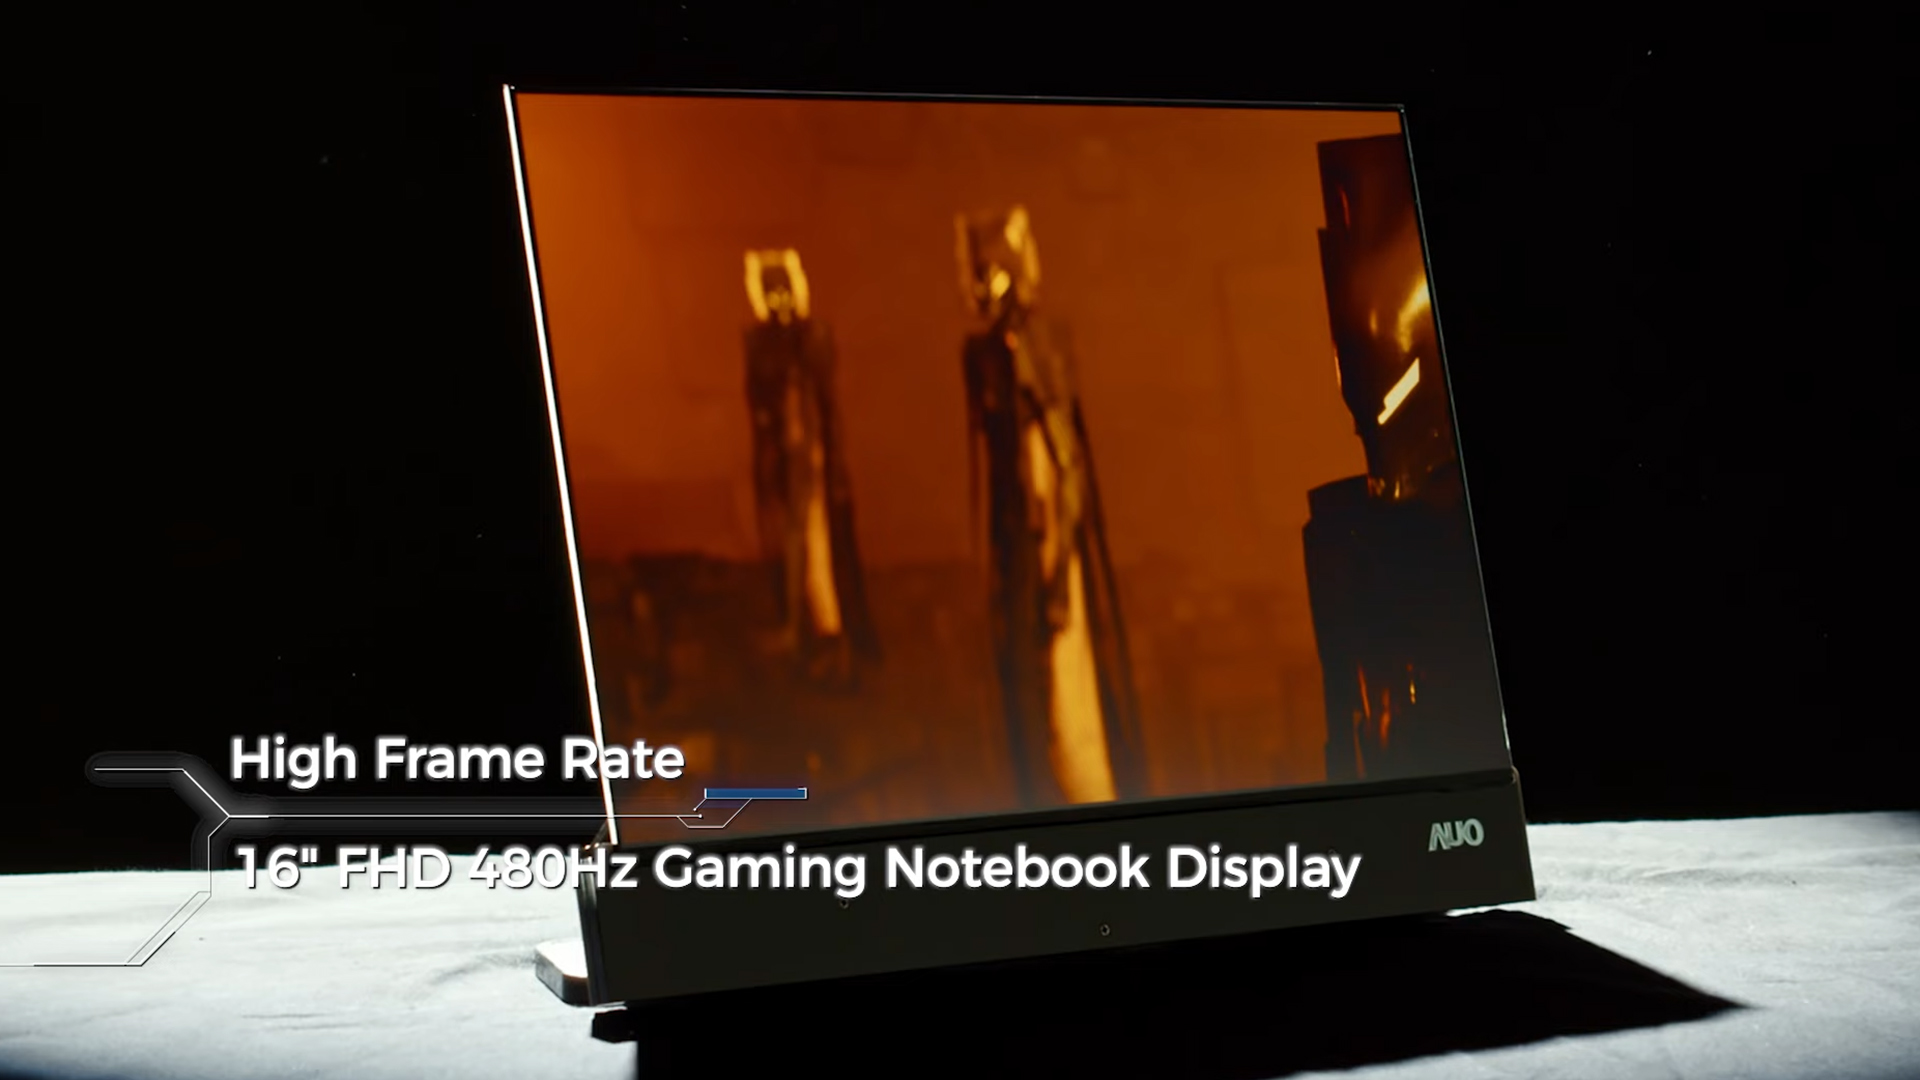 AUO Gaming Display 480 Hz